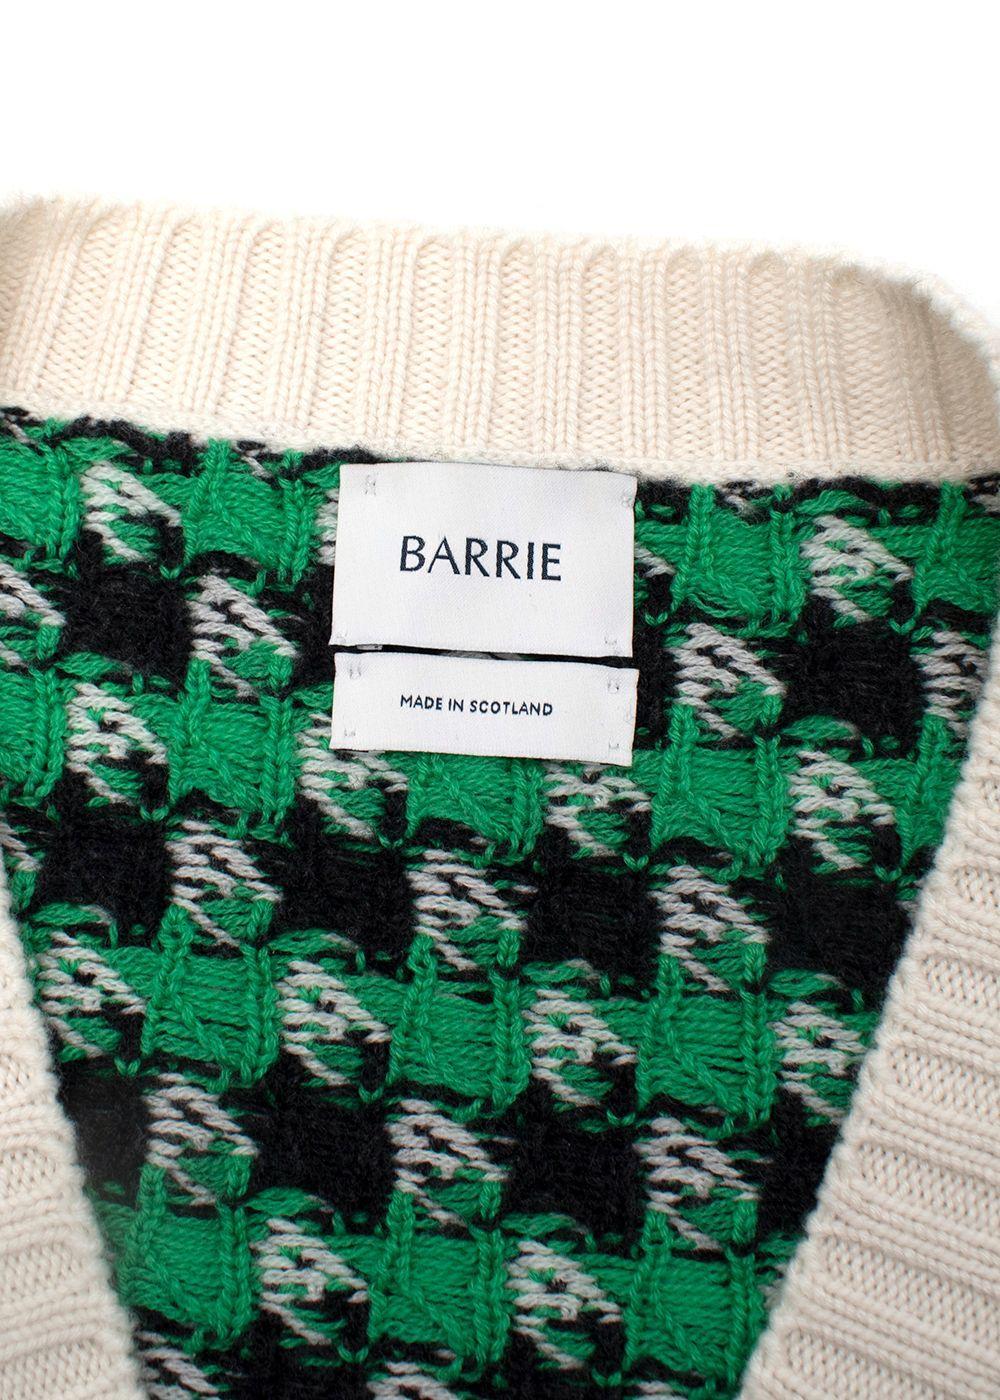 Barrie Green, White & Black Knitted Vest & Trousers - US 4/6 In Excellent Condition For Sale In London, GB